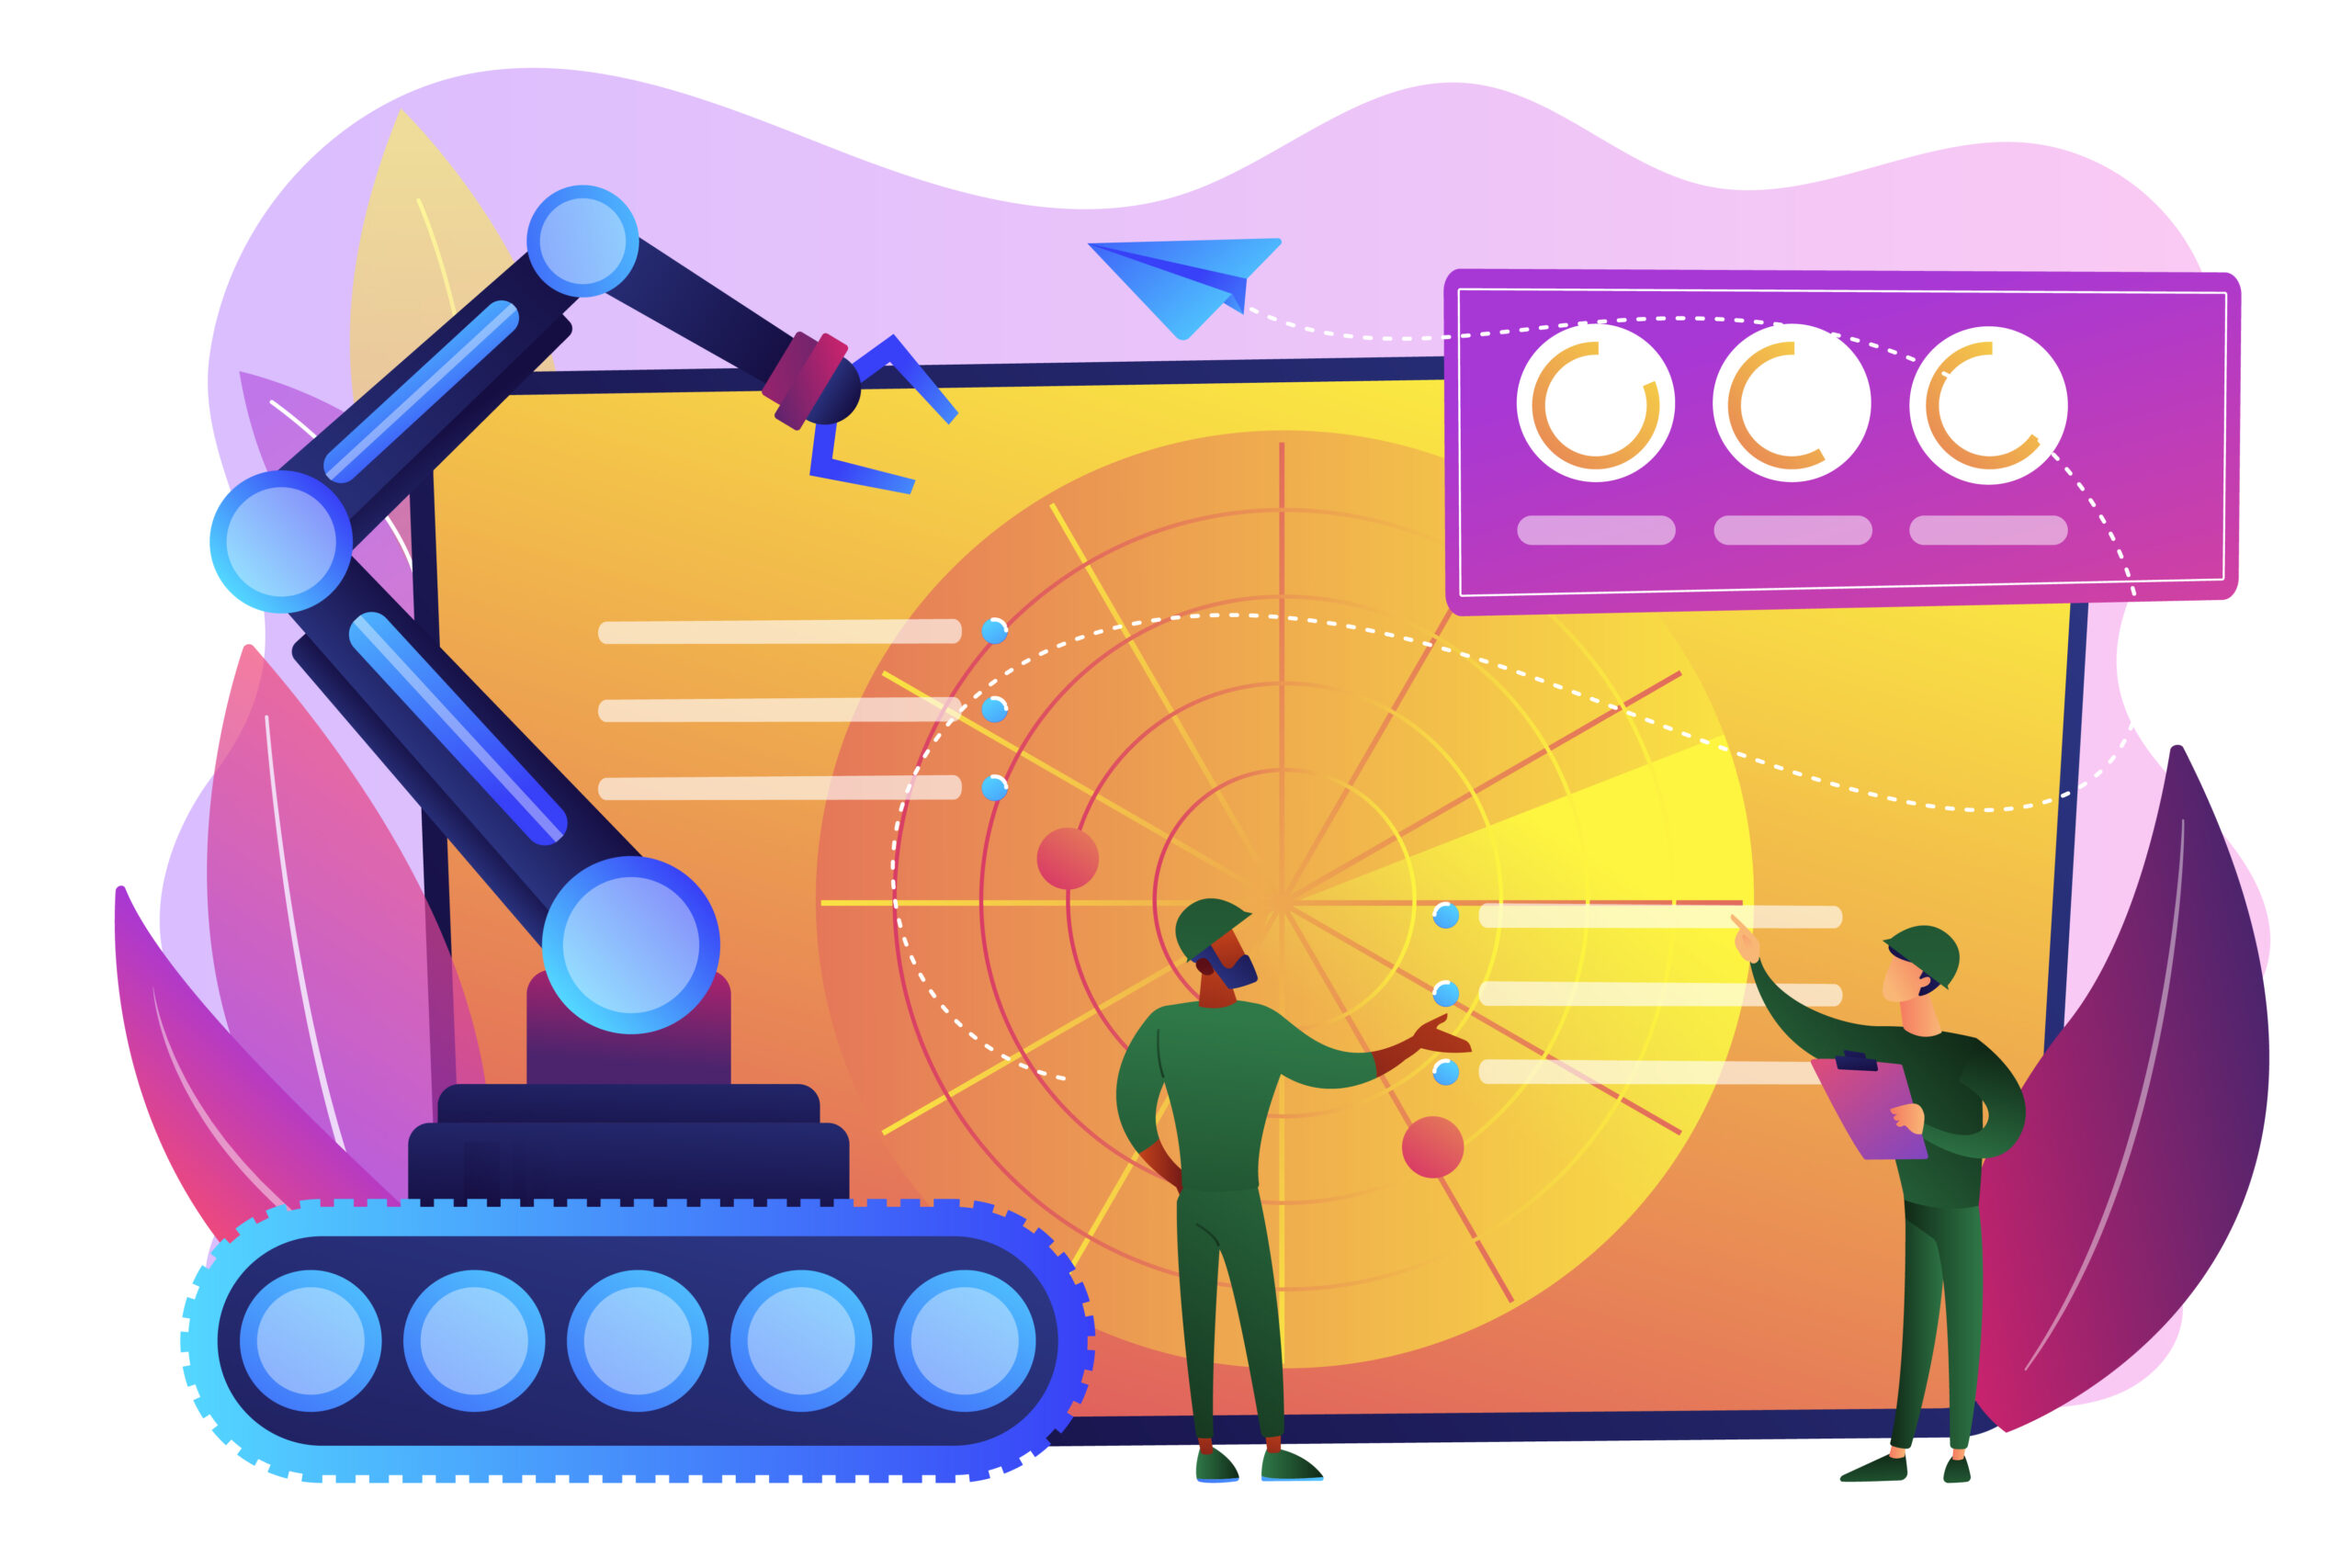 Machinery Industry on Google